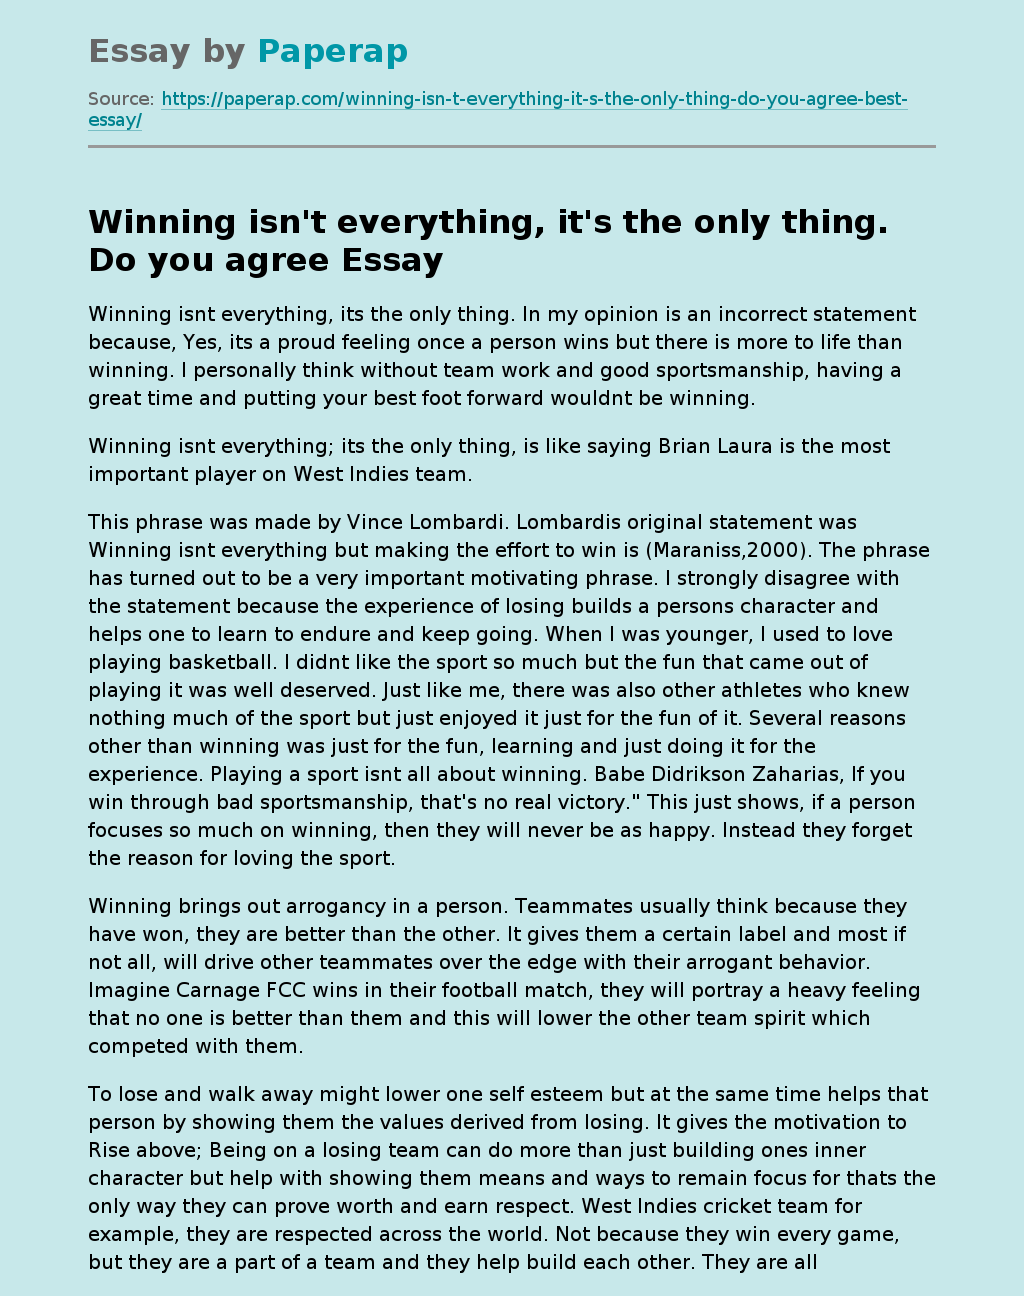 Winning isn't everything, it's the only thing. Do you agree